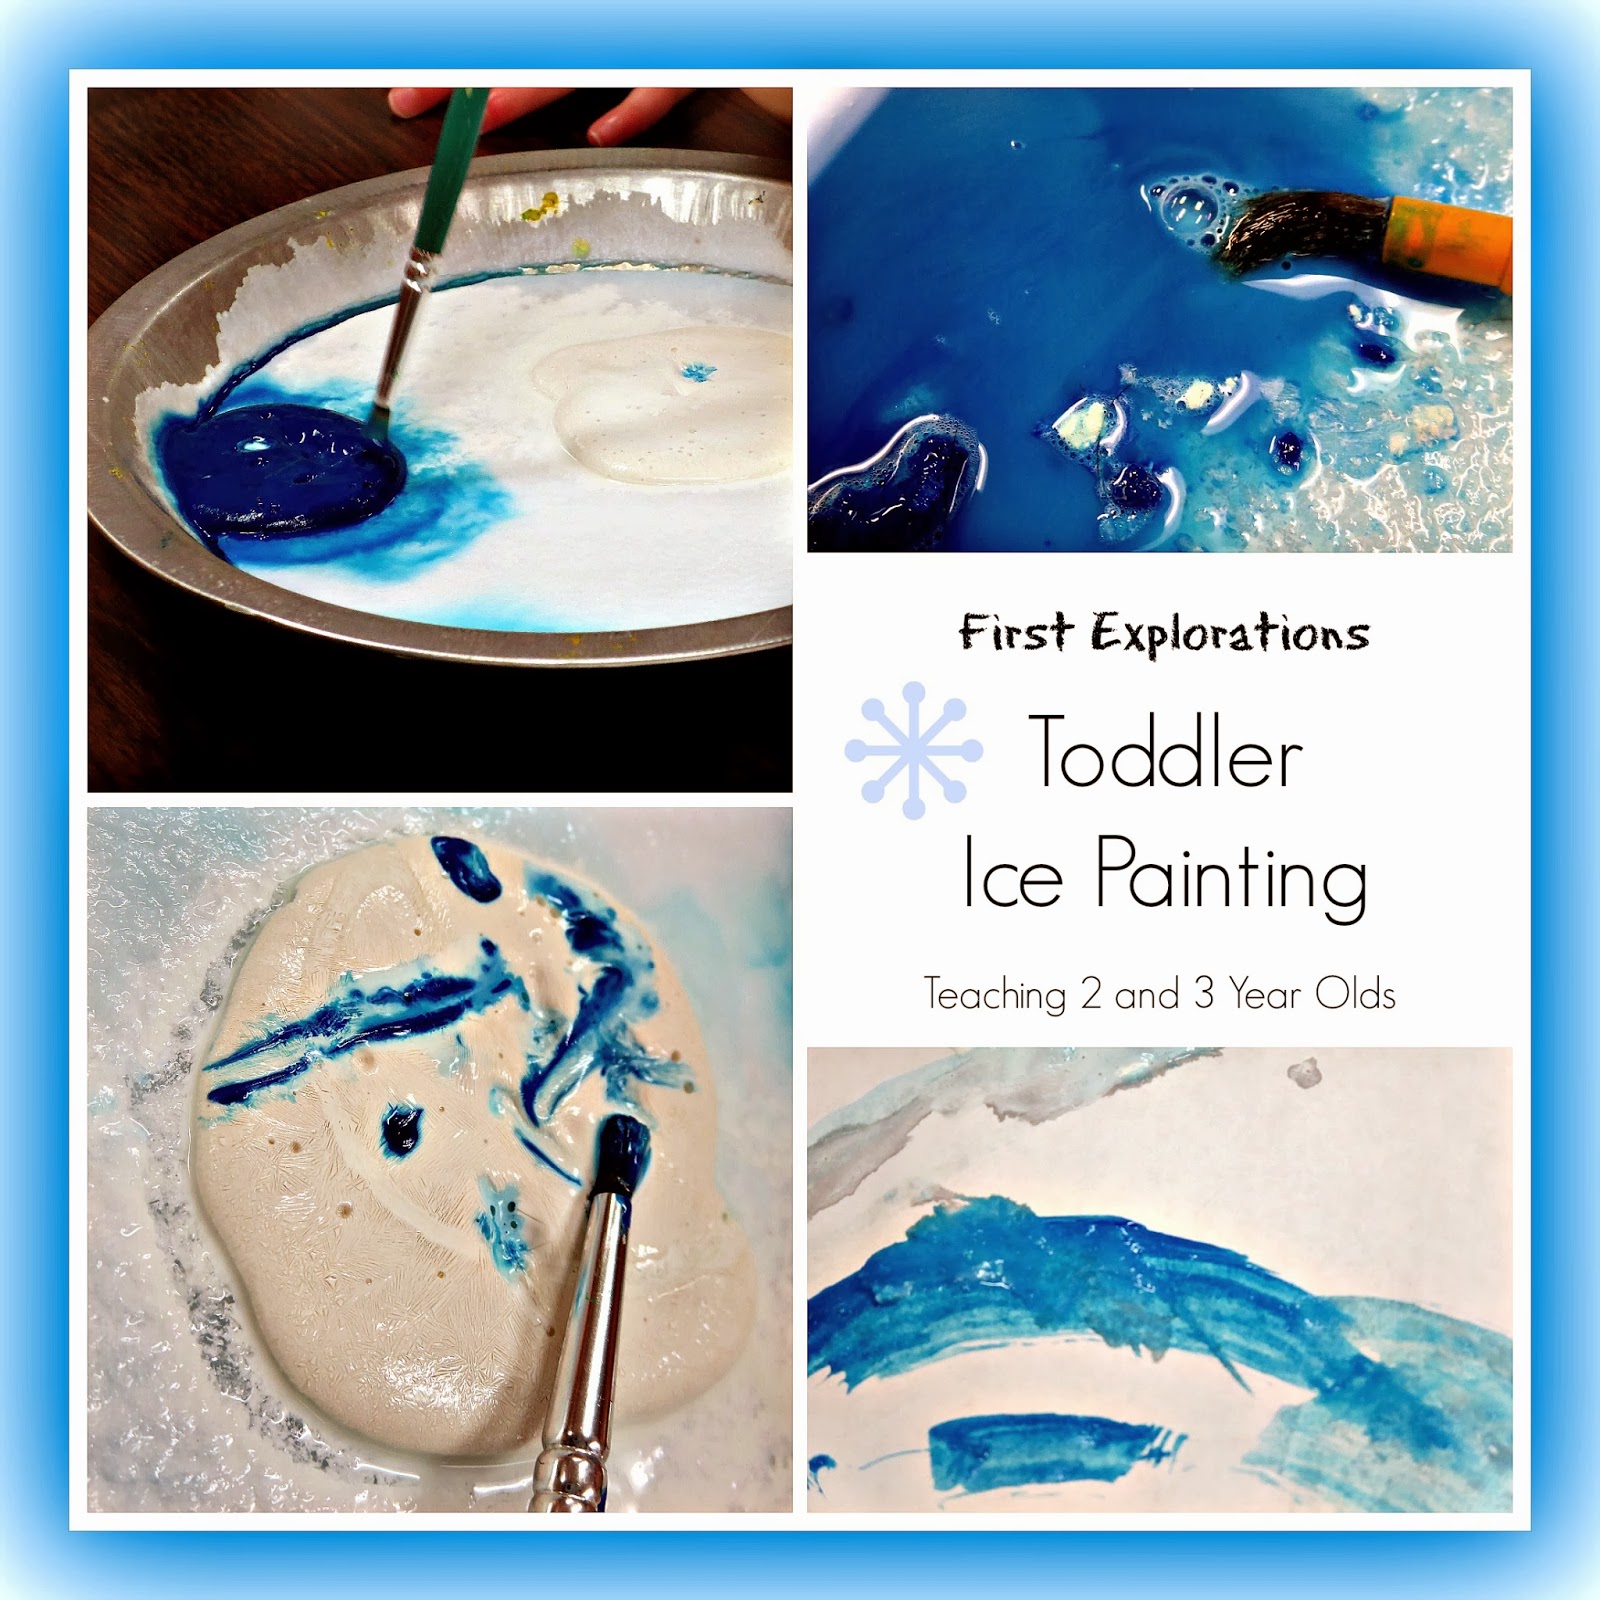 Painting on Ice - Teaching 2 and 3 year olds